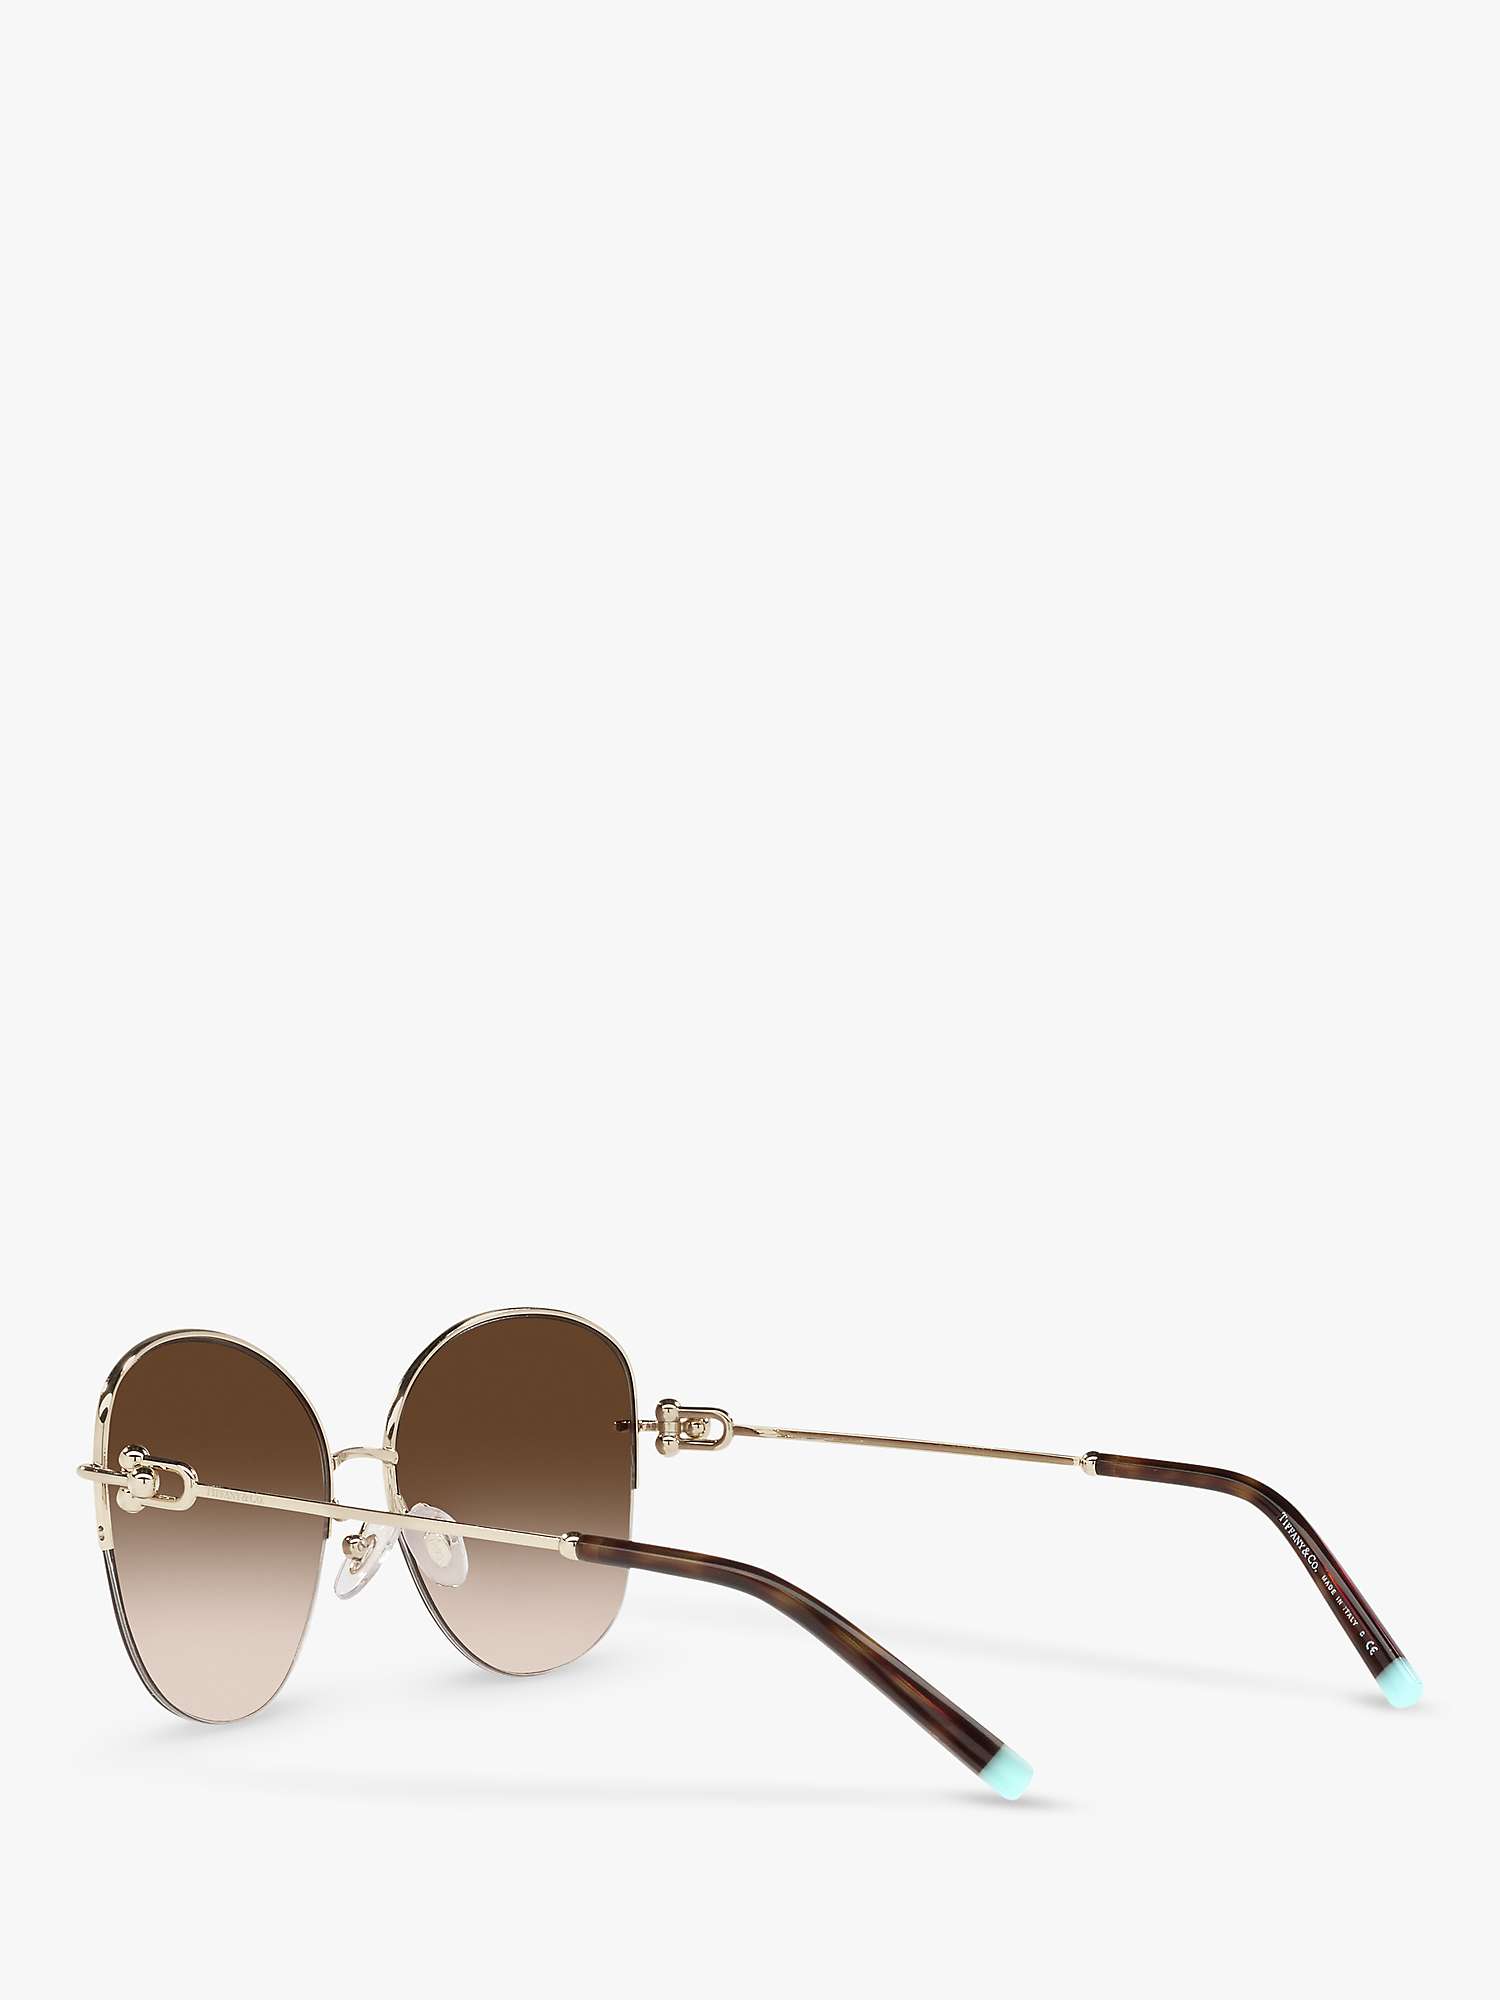 Buy Tiffany & Co TF3082 Women's Pillow Shape Sunglasses, Pale Gold/Brown Gradient Online at johnlewis.com